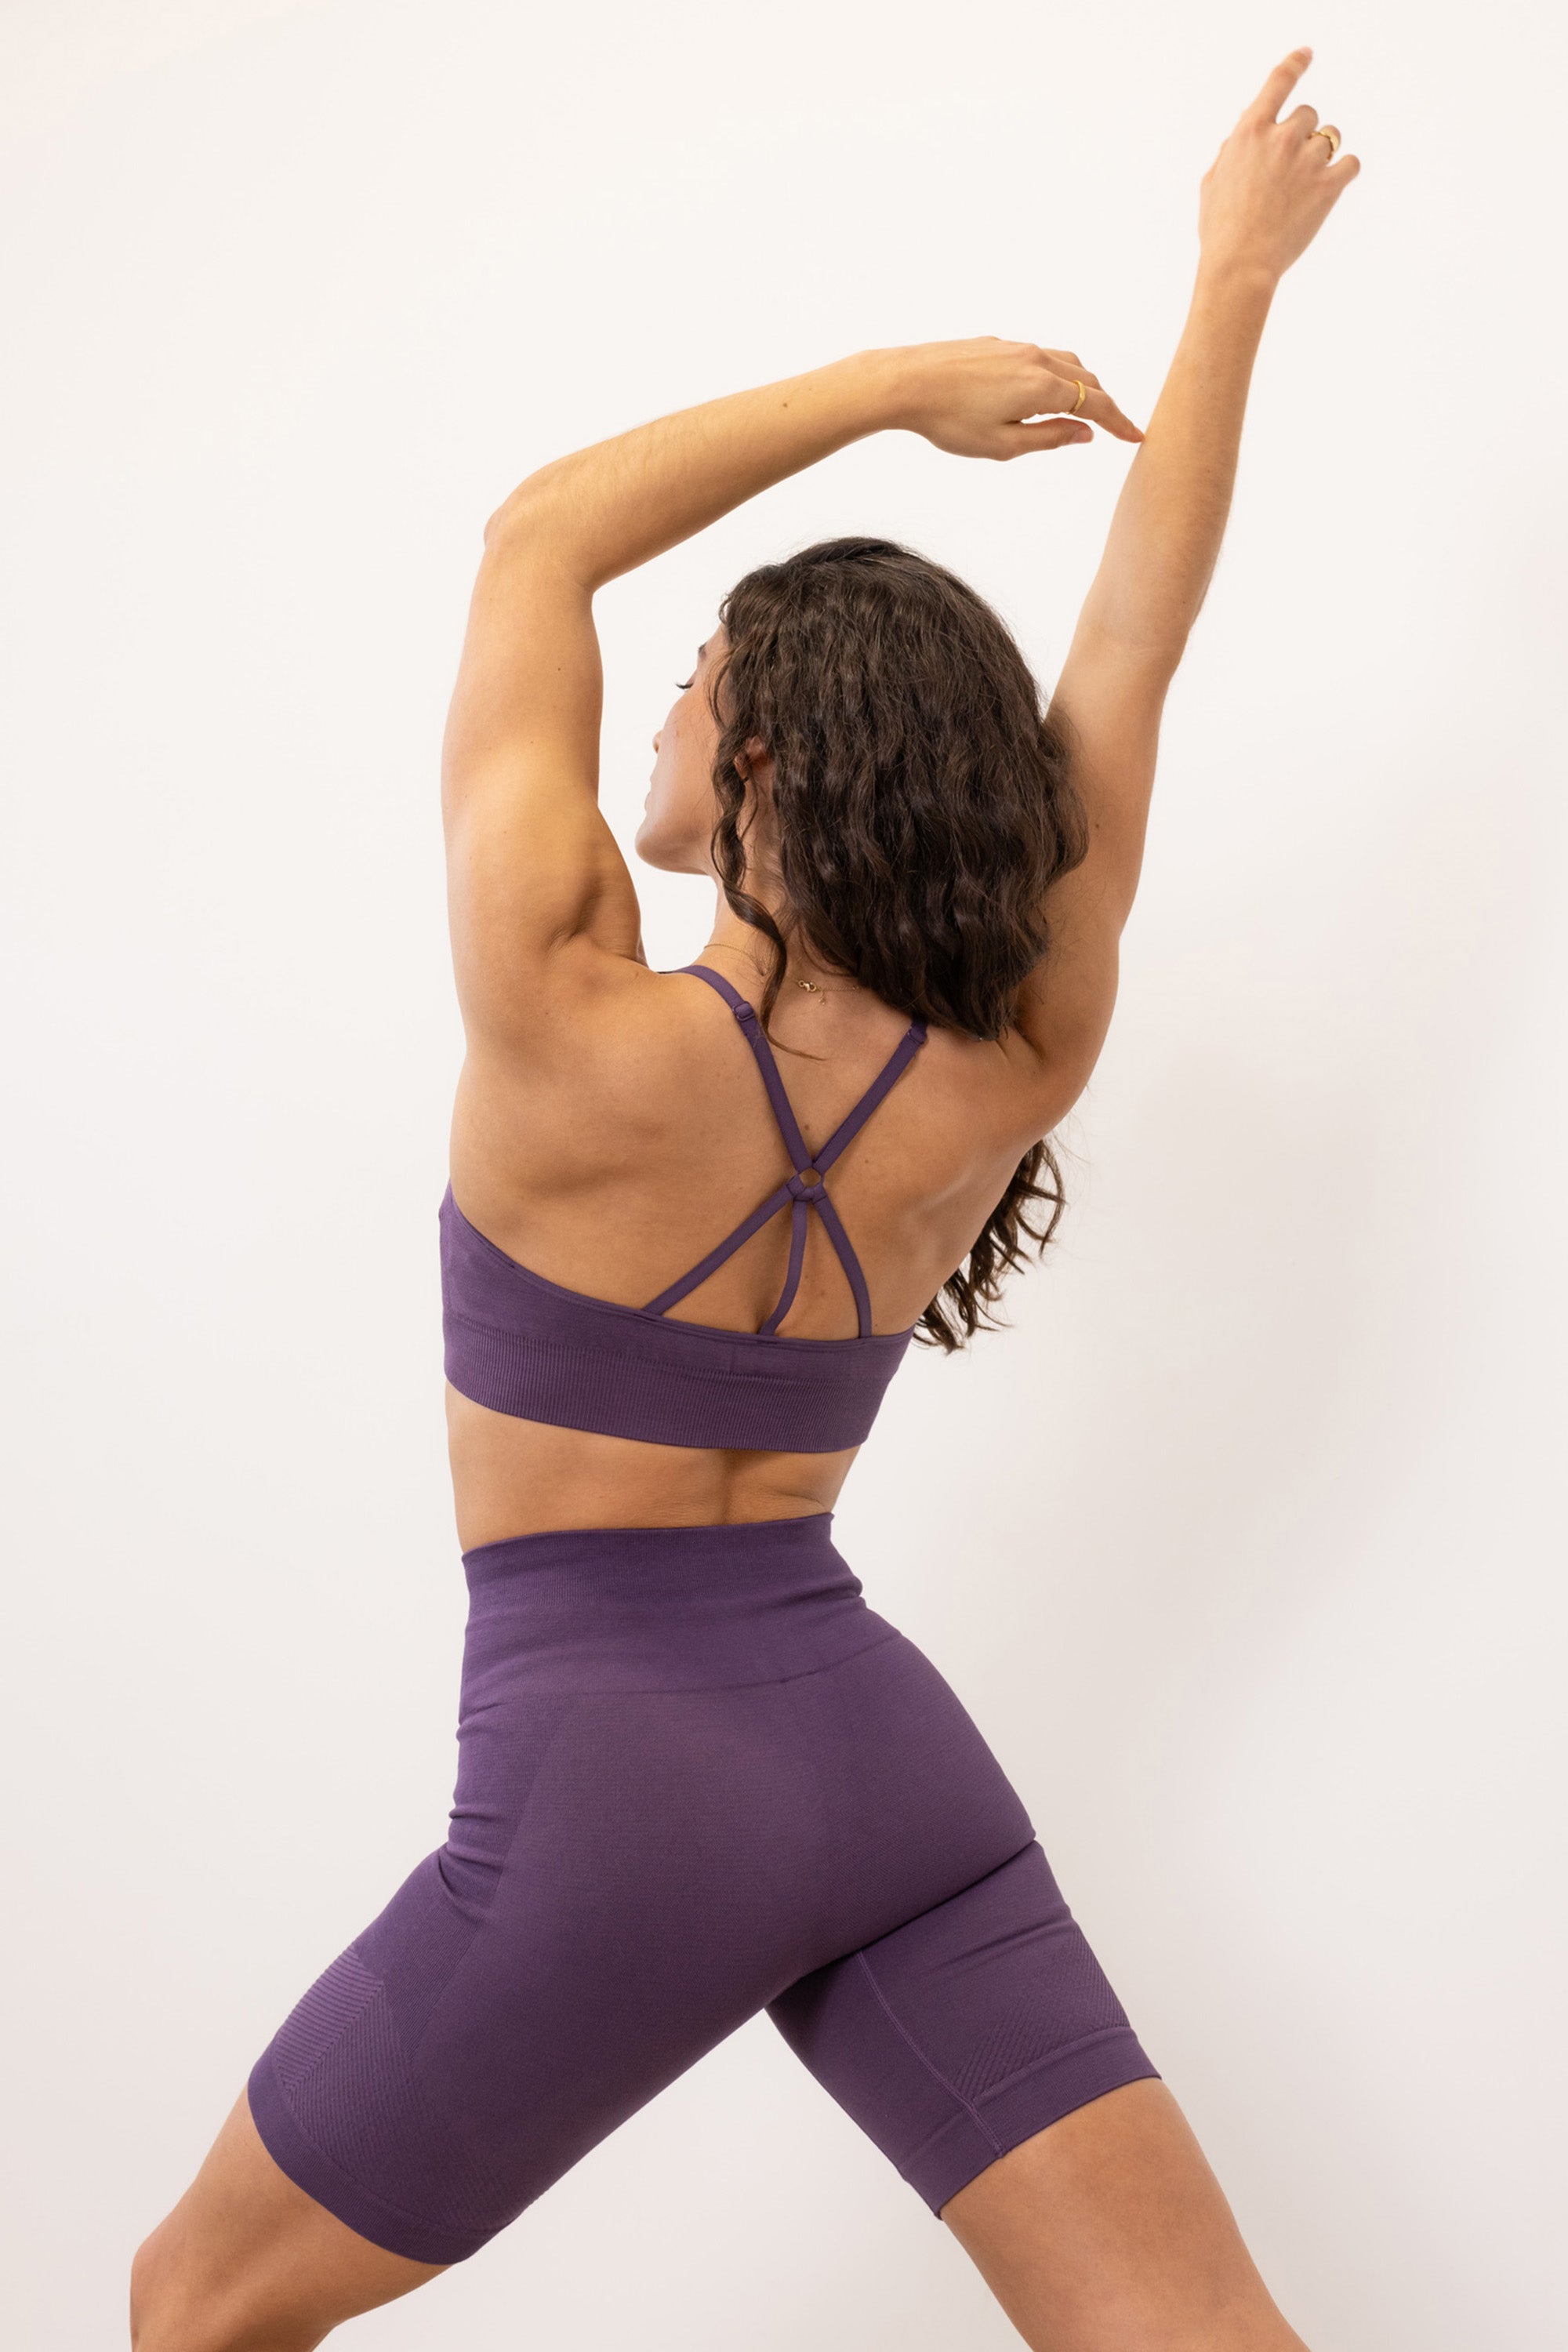 Purple ribbed recycled modal shorts and padded supportive sculpting sports bra for running, yoga, gym and pilates from sustainable activewear brand Jilla Active  Edit alt text